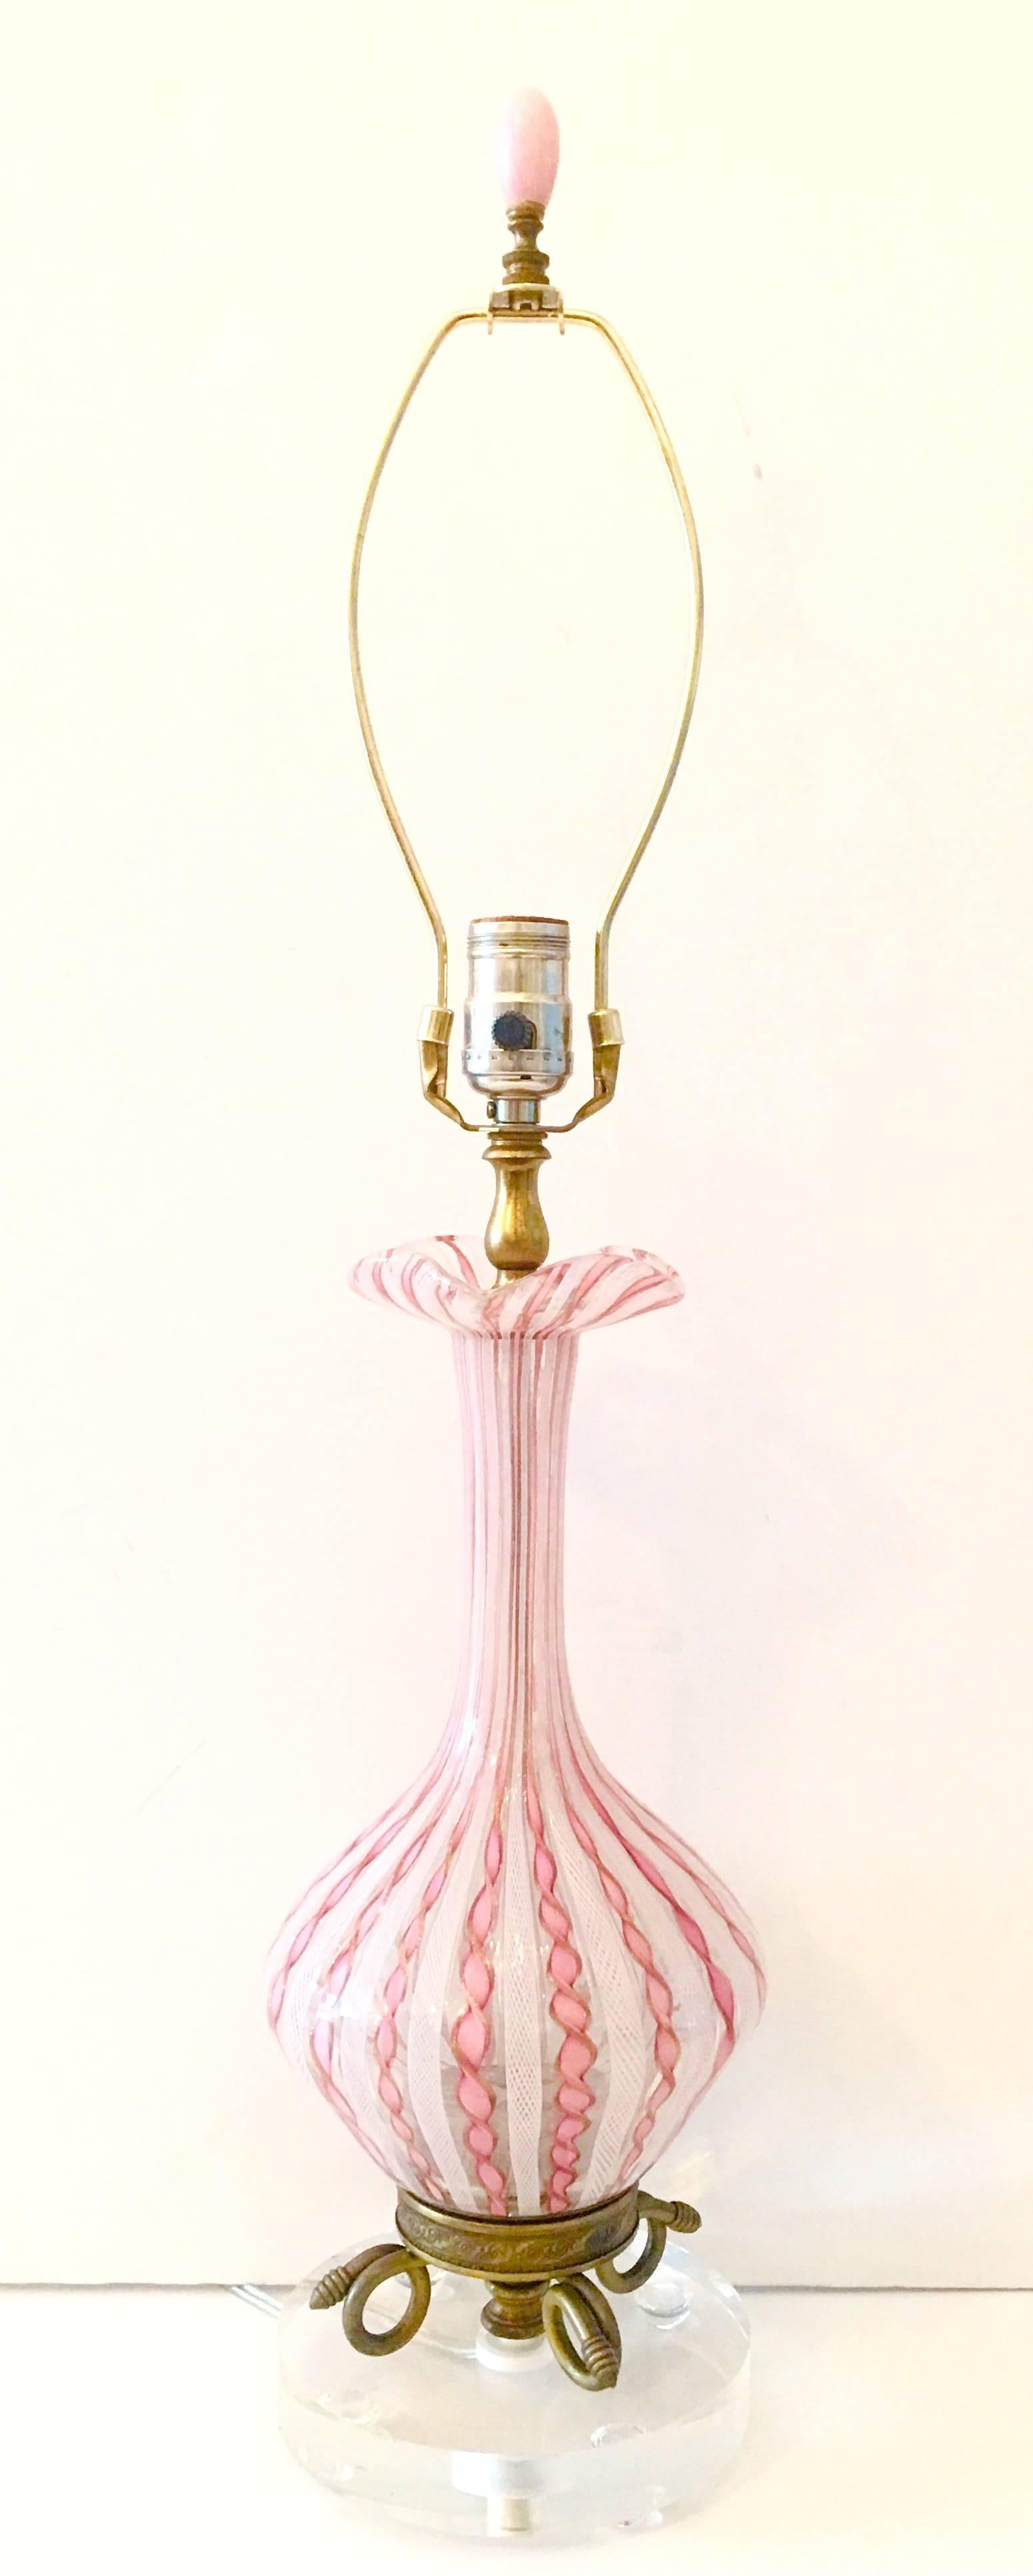 A very special 1940s brass and Murano glass Latticino ribbon pink and white ruffle swirl lamp with 22-karart gold dust detail. Original brass fittings, including a serpentine brass detail at the new Lucite base and pink onyx finial. Newly wired on a